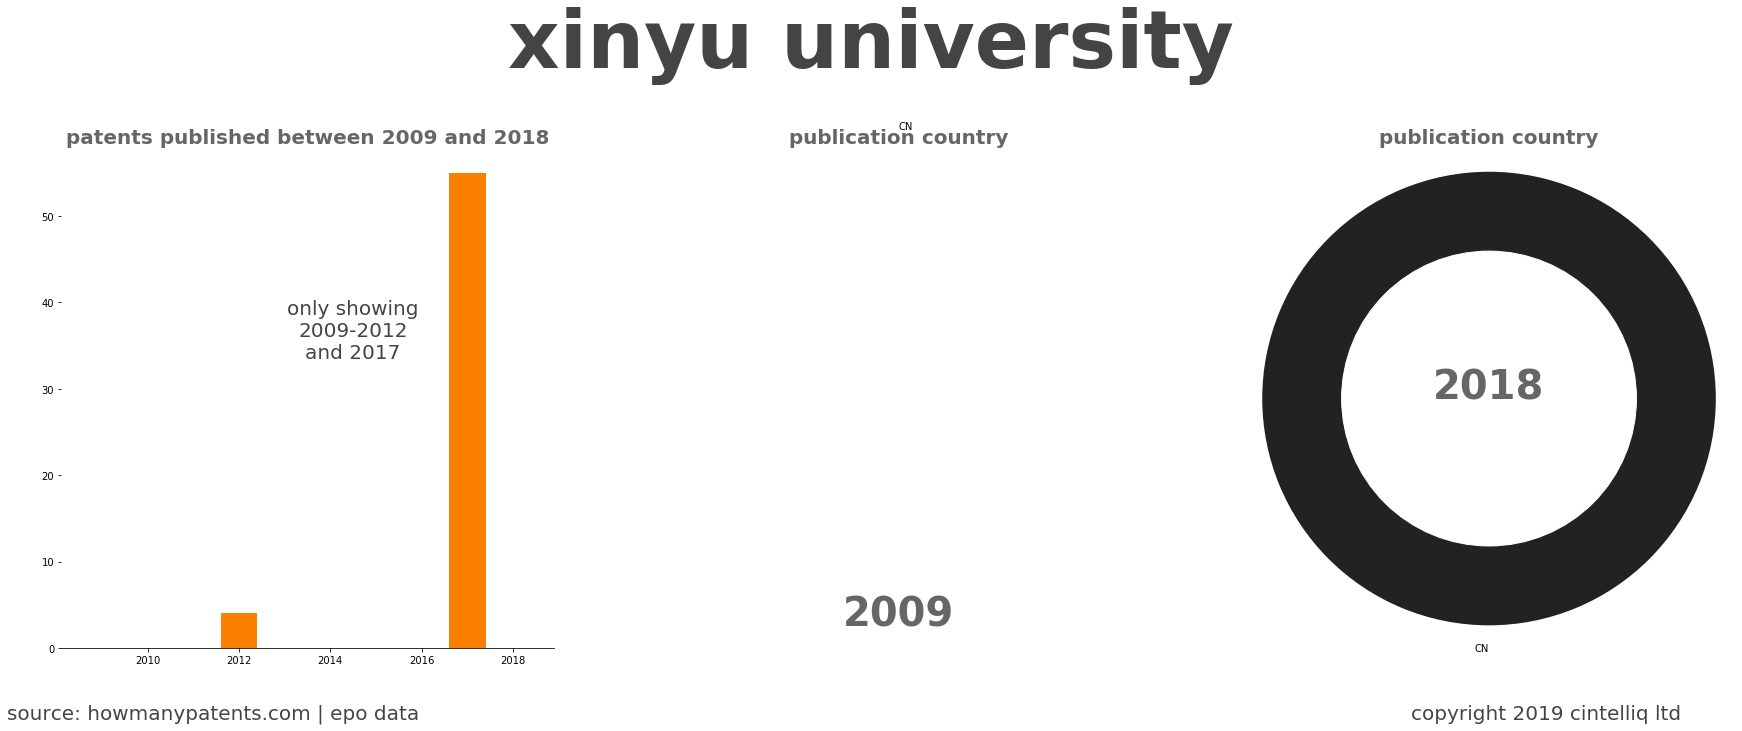 summary of patents for Xinyu University